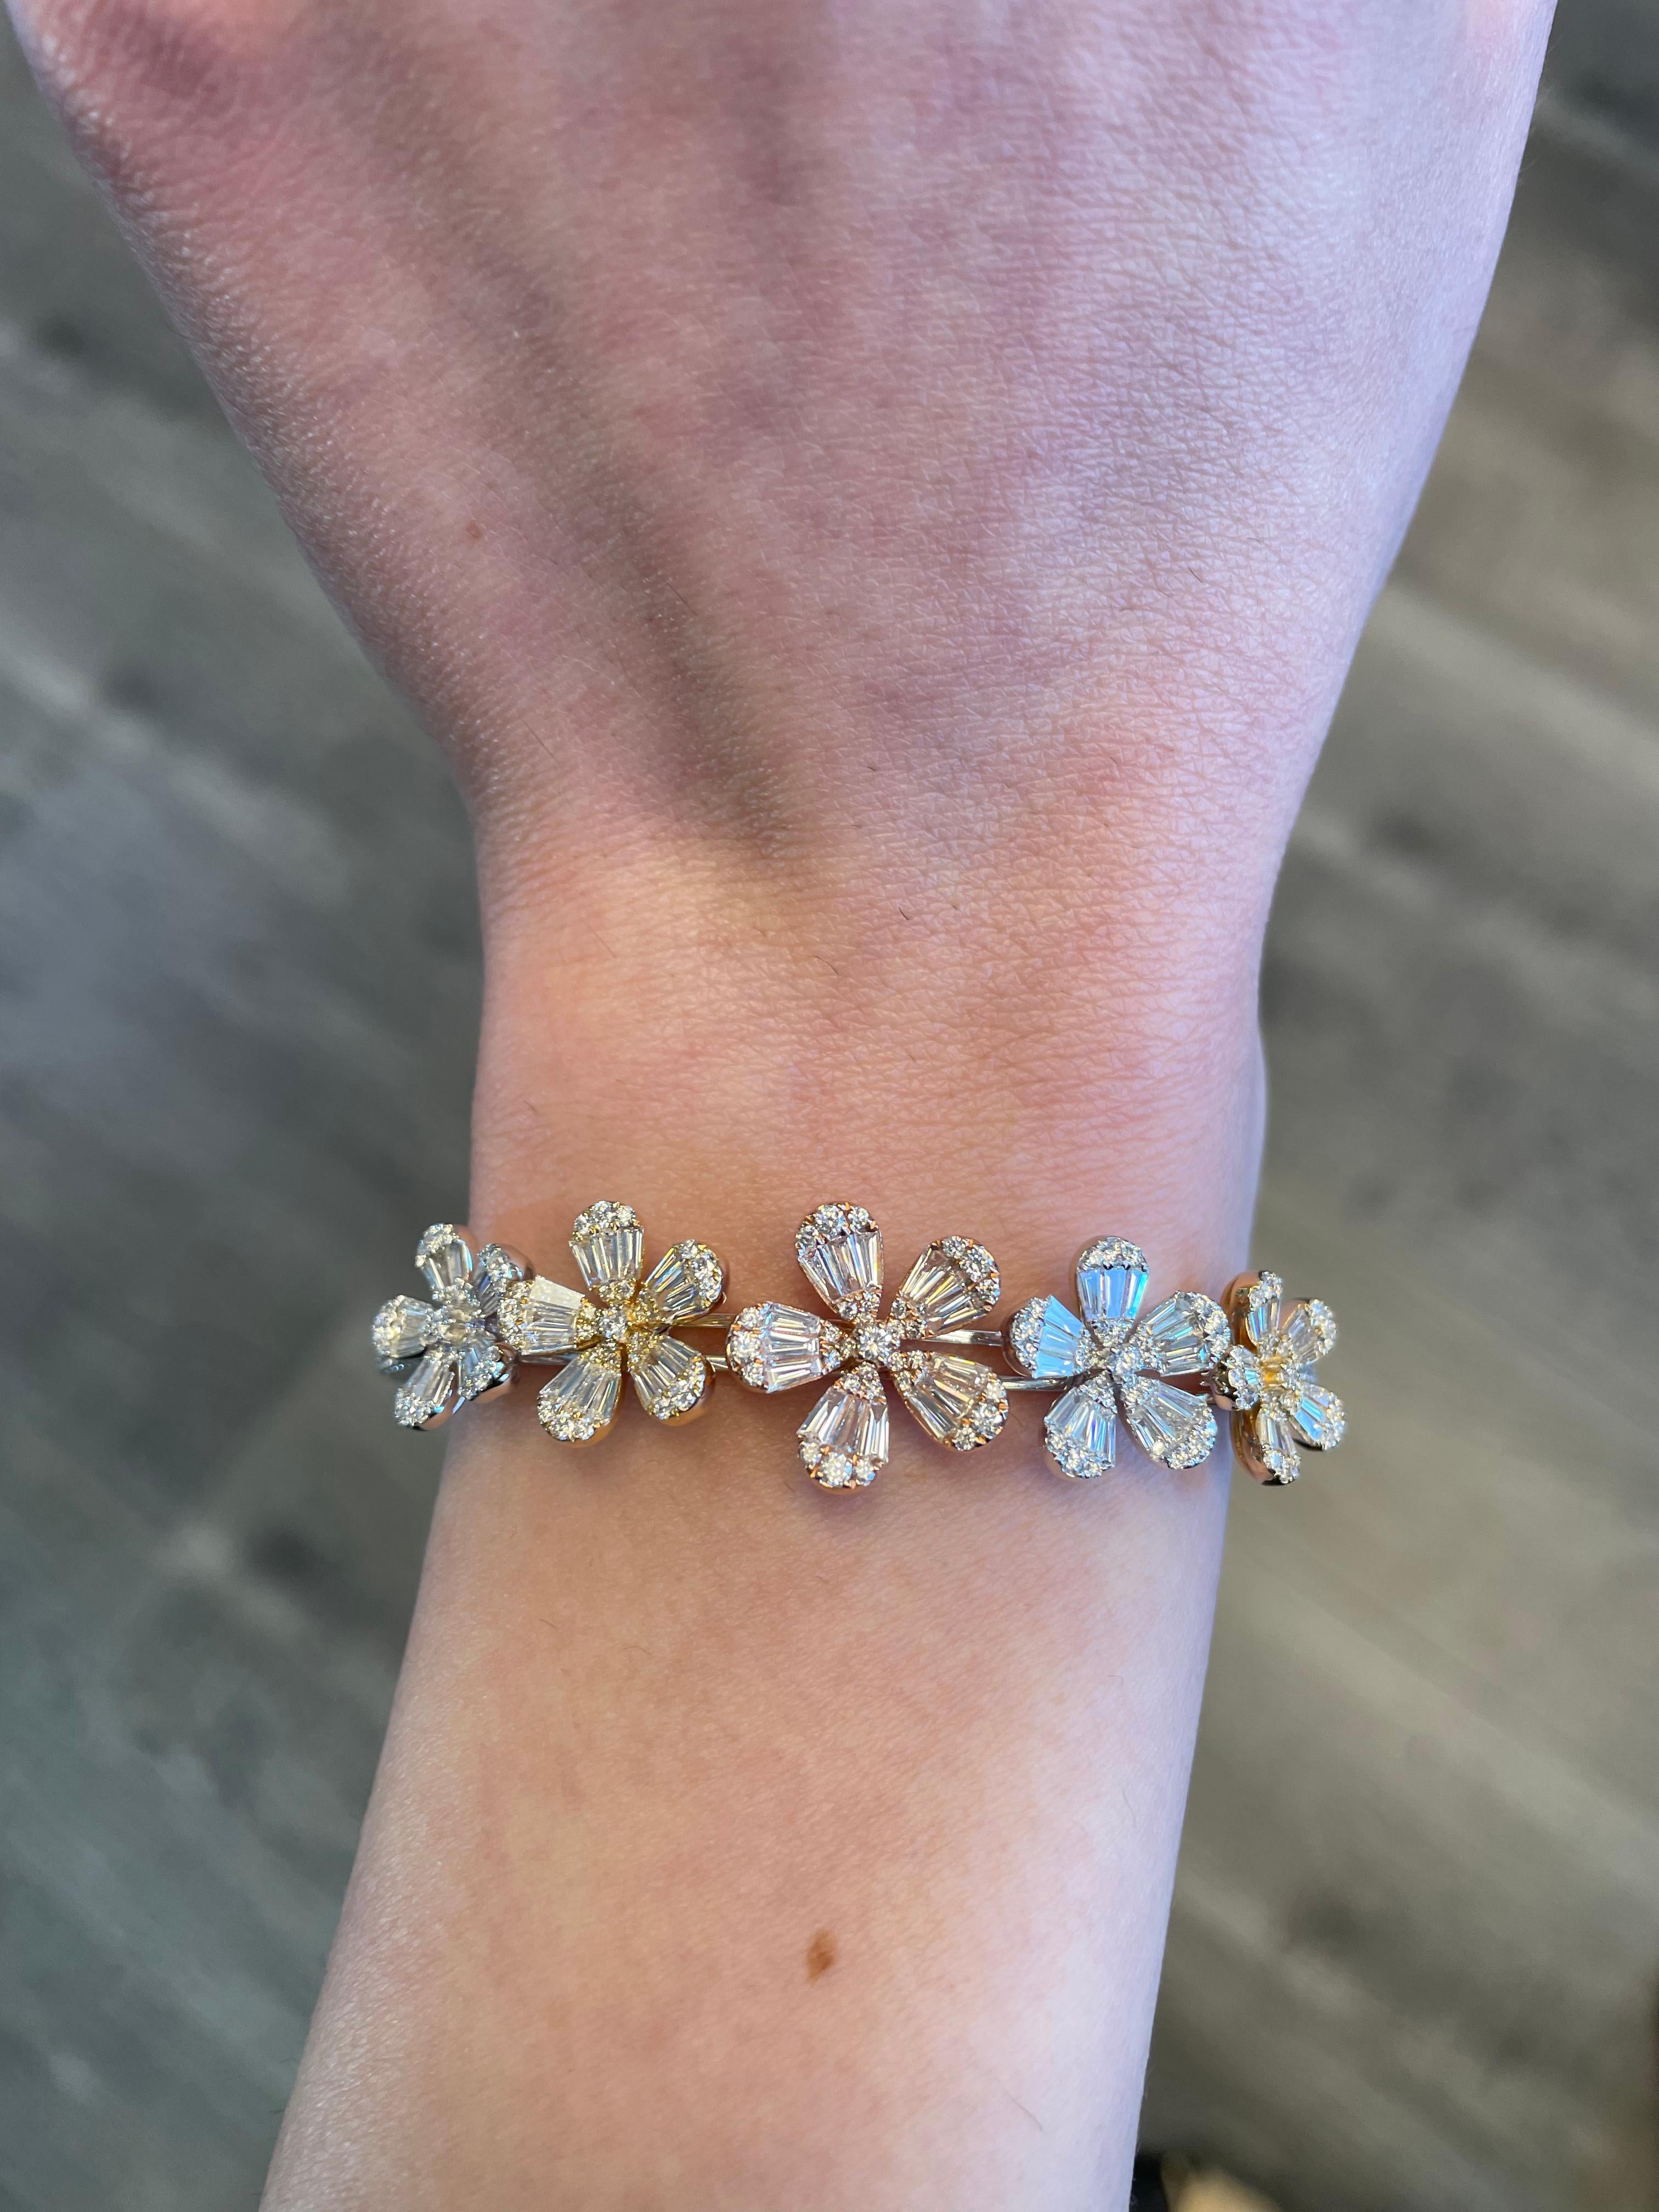 Exquisite modern diamond floral bangle, illusion set. By Alexander Beverly Hills.
263 tapered baguette and round cut diamonds, 3.01 carats. Approximately G/H color and VS clarity. 14.49 grams 18-karat white, yellow, and rose gold. 
Accommodated with